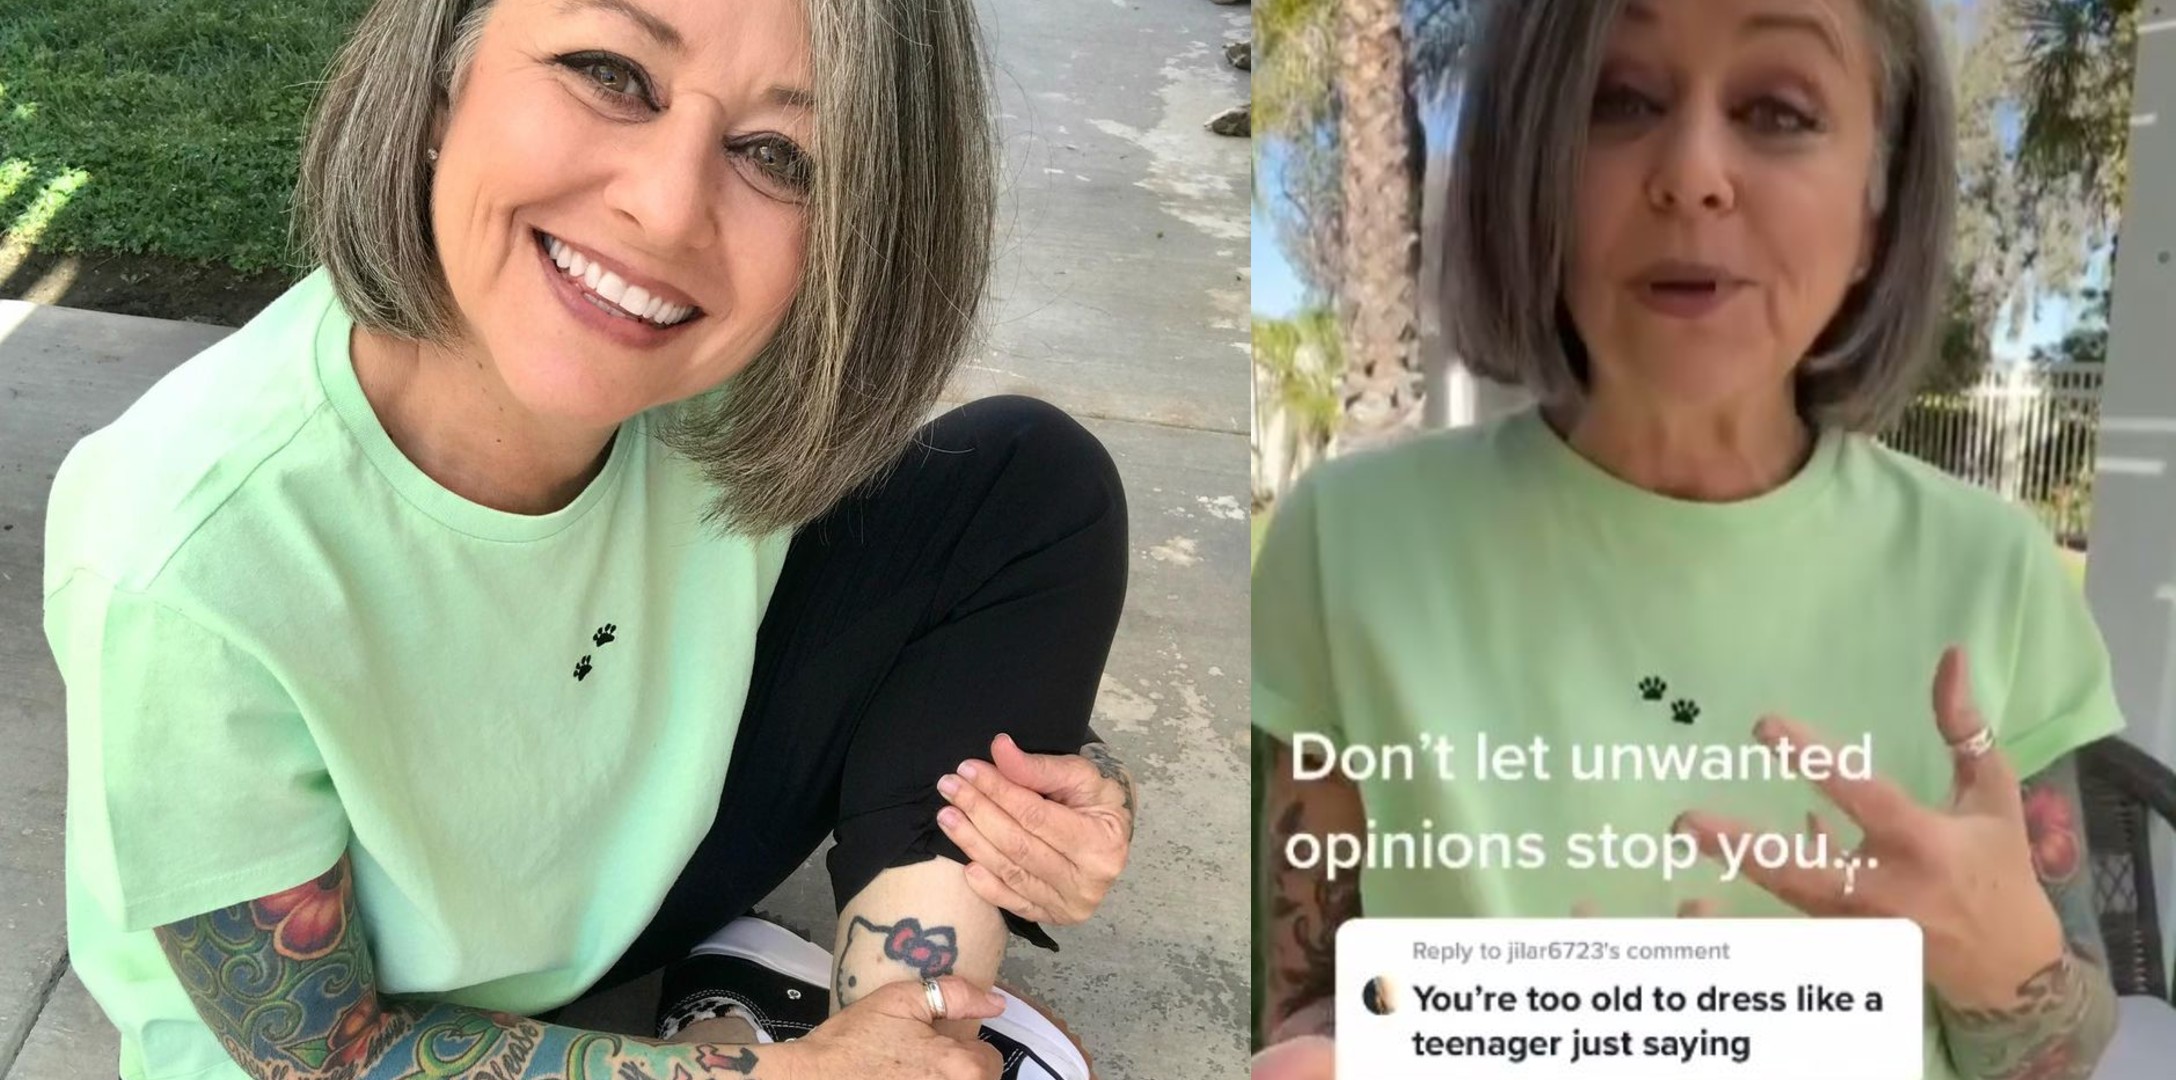 Woman In Her 50s Gets Told She's “Too Old To Dress Like A Teenager” –  Responds With Her Outfit